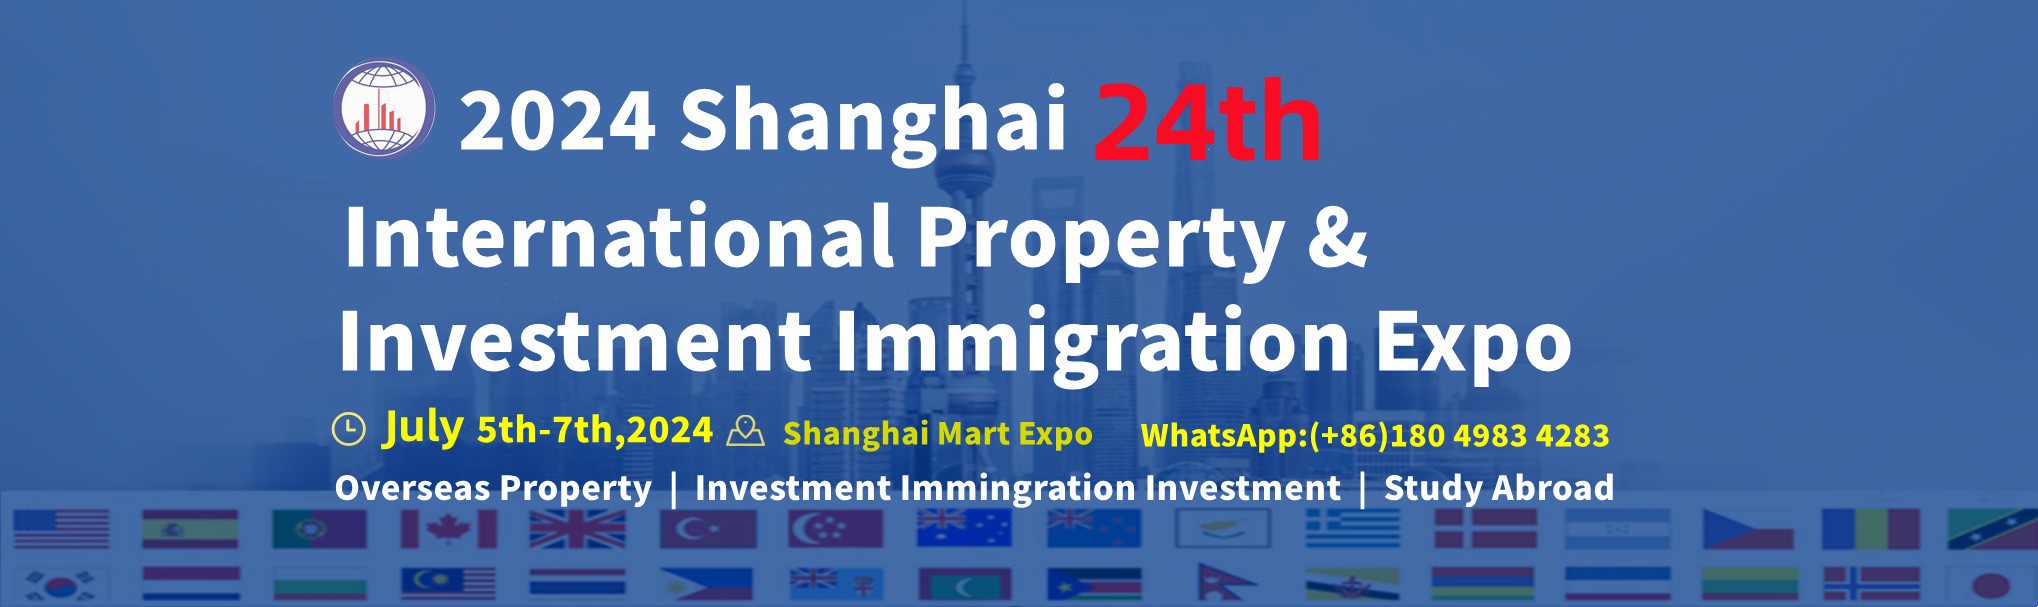 2024 Shanghai 24th International Property & Investment Immigration Expo,2024 Shanghai 24st International Property Expo,Shanghai International Property Expo,Shanghai Investment Immigration Expo,2024 Shanghai Immigration Exhibition,2024 Shanghai Overseas Property Exhibition,Investment Immigration Expo,International Property Expo,oversea property exhibition,Overseas investment exhibition,property exhibition,Overseas Property Exhibition,Immigration and Study Abroad Exhibition,Investment Exhibition,Shanghai Study Abroad Exhibition,Overseas Property Immigration Exhibition,2024 Overseas Property Immigration Exhibition,Immigration Exhibition,Investment Immigration Exhibition,Study Abroad Exhibition,Overseas Property Exhibition,Real Estate Exhibition,Overseas Property Investment Exhibition,Shanghai Overseas Property Investment Exhibition,Shanghai Overseas Property Immigration and Study Abroad Exhibition,Shanghai Overseas Property Immigration and Study Abroad Exhibition,Overseas Property Exhibition,Shanghai Property Exhibition,Overseas Property Exhibition,Shanghai Overseas Real Estate Exhibition, Shanghai International Real Estate Exhibition, Shanghai Overseas Real Estate Investment Immigration Exhibition, Overseas Study Abroad Exhibition, Pension Real Estate Exhibition, Training and Education Exhibition, International Real Estate Exhibition, Real Estate Exhibition, China Real Estate Exhibition, Immigration and Study Abroad Exhibition, Study Abroad & Immigration Exhibition,Real Estate Fair,International Real Estate Exhibition,Overseas Real Estate Exhibition,China Real Estate Exhibition,International Real Estate Exhibition,High-end Real Estate Exhibition,Real Estate Shanghai Exhibition,Real Estate Shanghai Exhibition,China Real Estate Exhibition,Overseas Real Estate Exhibition,Overseas Property & Immigration Exhibition,Overseas Property & Study Exhibition,Overseas Property Expo,International Immigration & Study Abroad Exhibition,Shanghai International Property Exhibition,Shanghai Overseas Property & Immigration Exhibition,2024 Domestic Property Exhibition,Study Abroad Exhibition,2024 Investment Immigration Exhibition,2024 Beijing Immigration Exhibition,2024 Shanghai Immigration Abroad,2024 Overseas Study Exhibition Time Table,2024 Overseas Property Immigration and Study Abroad Exhibition,2024 Study Abroad Exhibition,Immigration and Study Abroad Exhibition 2024,2024 Shanghai Overseas Exhibition,2024 Shanghai Immigration Exhibition,2024 Shanghai Study Abroad Education Exhibition Time,2024 Study Abroad Exhibition,Study Abroad Exhibition,Study Abroad Exhibition 2024,Overseas Property Immigration Exhibition,2024 Shanghai Overseas Property Exhibition,2024 Shanghai Real Estate Exhibition,2024 Shanghai Overseas Real Estate Exhibition Schedule,Overseas Real Estate Exhibition,2024 (Shanghai Real Estate Exhibition),Immigration Expo,Venture Capital Immigration Exhibition,Investment Immigration and Study Abroad Exhibition,Immigration Real Estate Exhibition,Real Estate Exhibition,Shanghai Real Estate Exhibition,Shanghai Real Estate Exhibition,Shanghai Real Estate Exhibition,Shanghai Overseas Property Investment & Immigration & Study Abroad Exhibition,Guangzhou Overseas Property Exhibition,Australian Property Fair,Overseas Property Immigration & Study Exhibition,Overseas Property & Immigration Exhibition,Shanghai Overseas Real Estate Expo,International Immigration Expo,Shanghai Overseas Real Estate,Overseas Real Estate,Overseas Real Estate,Investment,Immigration,Real Estate Immigration,Real Estate International,International Real Estate,Immigration & Study,Study Abroad,Shanghai Overseas Real Estate,Shanghai Immigration,Immigration Shanghai,Apartment,International School,High-end Property,Pension Real Estate,Bank,Law Firm,International Commercial Real Estate Exhibition,Housing Exhibition,Tourism Real Estate,Global Real Estate Investment Exhibition,High-end Real Estate Investment Exhibition,Villa,Resort Hotel,Castle,Ski Villa,Marina,Sea View Room,Tourism Real Estate,Overseas Immigration Agency,Consulting Service Agency,Investment Immigration,Intermediary Agency,EB-5 Regional Center,Finance,Private Equity Firms,Immigration Services,Shanghai Immigration Exhibition,Shanghai Overseas Property Expo,2024 Shanghai 23rd Overseas Property Immigration and Study Abroad Exhibition,2024 Immigration Exhibition,2024 Investment Immigration Exhibition,2024 Study Abroad Expo,2024 Overseas Property Exhibition,2024 Overseas Property Exhibition,2024 Overseas Property Investment Exhibition,2024 Shanghai Overseas Property Investment Exhibition,2024 International Overseas Property Immigration Investment and Study Abroad Exhibition,2024 Shanghai Overseas Property Immigration & Study Abroad Exhibition,2024 Overseas Property Exhibition,2024 International Property Exhibition,2024 Shanghai Property Exhibition,2024 Overseas Property Exhibition,2024 Shanghai Overseas Property Exhibition,2024 Shanghai International Property Exhibition,2024 Shanghai Overseas Property Investment & Immigration Exhibition,2024 Overseas Study Expo,2024 Senior Property Exhibition,2024 Training and Education Exhibition,2024 International Property Exhibition,2024 Property Exhibition,2024 China Property Exhibition,2024 Immigration & Study Expo,2024 Overseas Property Fair,2024 International Property Fair,2024 Overseas Property Exhibition,2024 China Property Expo,2024 International Property Expo,2024 High-end Property Expo,2024 Property Shanghai Exhibition,2024 Property Shanghai Exhibition,2024 China Property Expo,2024 China Property Expo,2024 Overseas Property Immigration Exhibition,2024 Overseas Property Fair,2024 Overseas Property Expo,2024 International Immigration & Study Expo,2024 Shanghai International Property Expo,2024 Shanghai Study Abroad Expo,2024 China Overseas Property Expo,2024 Immigration & Property Expo,2024 Venture Capital & Immigration Exhibition,2024 Investment Immigration & Study Abroad Expo,2024 Immigration & Property Expo,2024 Real Estate Exhibition,2024 Shanghai Real Estate Exhibition,2024 Shanghai Real Estate Exhibition,2024 Shanghai Real Estate Exhibition,2024 Shanghai Real Estate Exhibition,2024 Shanghai Real Estate Exhibition,2024 Shanghai Real Estate Exhibition,2024 Shanghai Real Estate Exhibition,2024 Shanghai Real Estate Exhibition,2024 Shanghai Real Estate Exhibition,2024 Shanghai Real Estate Exhibition,2024 Shanghai Real Estate Exhibition,2024 Shanghai Real Estate Exhibition,2024 Shanghai Real Estate Exhibition,2024 Shanghai Real Estate Exhibition,2024 Shanghai Real Estate Exhibition,2024 Shanghai Real Estate Exhibition,2024 Shanghai Real Estate Exhibition,2024 Shanghai Real Estate Exhibition,2024 Shanghai Real Estate Exhibition,2024 Shanghai Real Estate Exhibition,2024 Shanghai Real Estate Exhibition,2024 Shanghai Real Estate Exhibition,2024 Shanghai Real Estate Exhibition,2024 Shanghai Real Estate Exhibition,2024 Shanghai Real Estate Exhibition,2024 Shanghai Real Estate Exhibition2024 Real Estate Fair,2024 Shanghai Real Estate Website,2024 Shanghai International Overseas Property Exhibition,2024 Shanghai Real Estate Exhibition,2024 Shanghai Real Estate Fair,2024 Shanghai Overseas Property Investment Immigration and Study Abroad Exhibition,2024 Guangzhou Overseas Property Exhibition,2024 Australian Property Fair,2024 Overseas Property Immigration Exhibition,2024 Overseas Property Immigration Exhibition,2024 Shanghai Overseas Real Estate Expo,2024 International Immigration Expo,www.opiexpo.com,opiexpo.com,2024(Shanghai)The 24st Overseas real estate Immigrant study abroad Exhibition,Overseas Real Estate Exhibition,Overseas Property Exhibition,Overseas Real Estate Investment Exhibition,Immigration Summit Forum,Shanghai High-end Real Estate Immigrant Investment Summit,2024 Shanghai Study Abroad Exhibition,Study Abroad Education Exhibition,Shanghai Study Abroad Fair,Shanghai Overseas Study Fair,Real Estate Exhibition,Shanghai Immigration Exhibition,SHANGHAI OVERSEAS PROPERTY-IMMIGRATION-INVESTMENT EXHIBITION - SHANGHAI EXPO